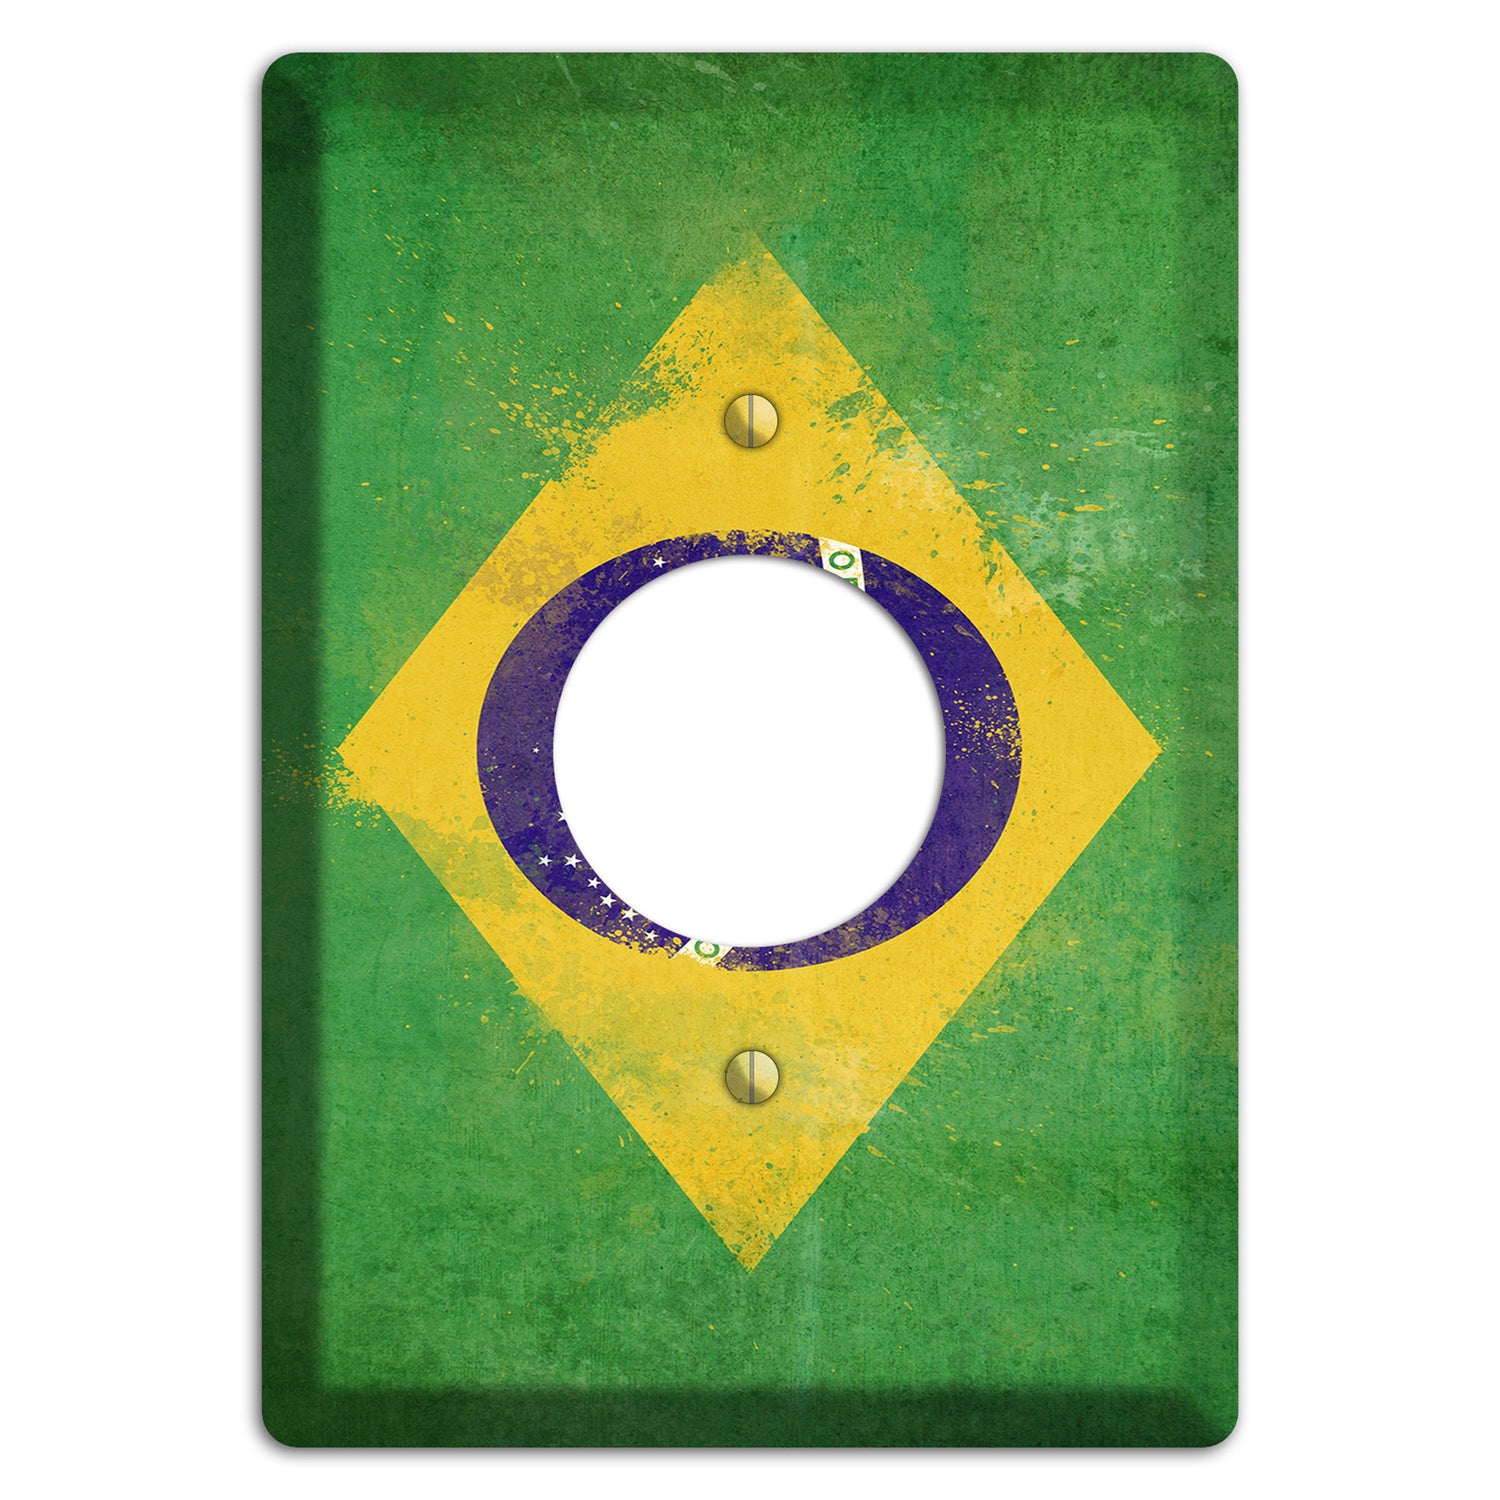 Brazil Cover Plates Single Receptacle Wallplate